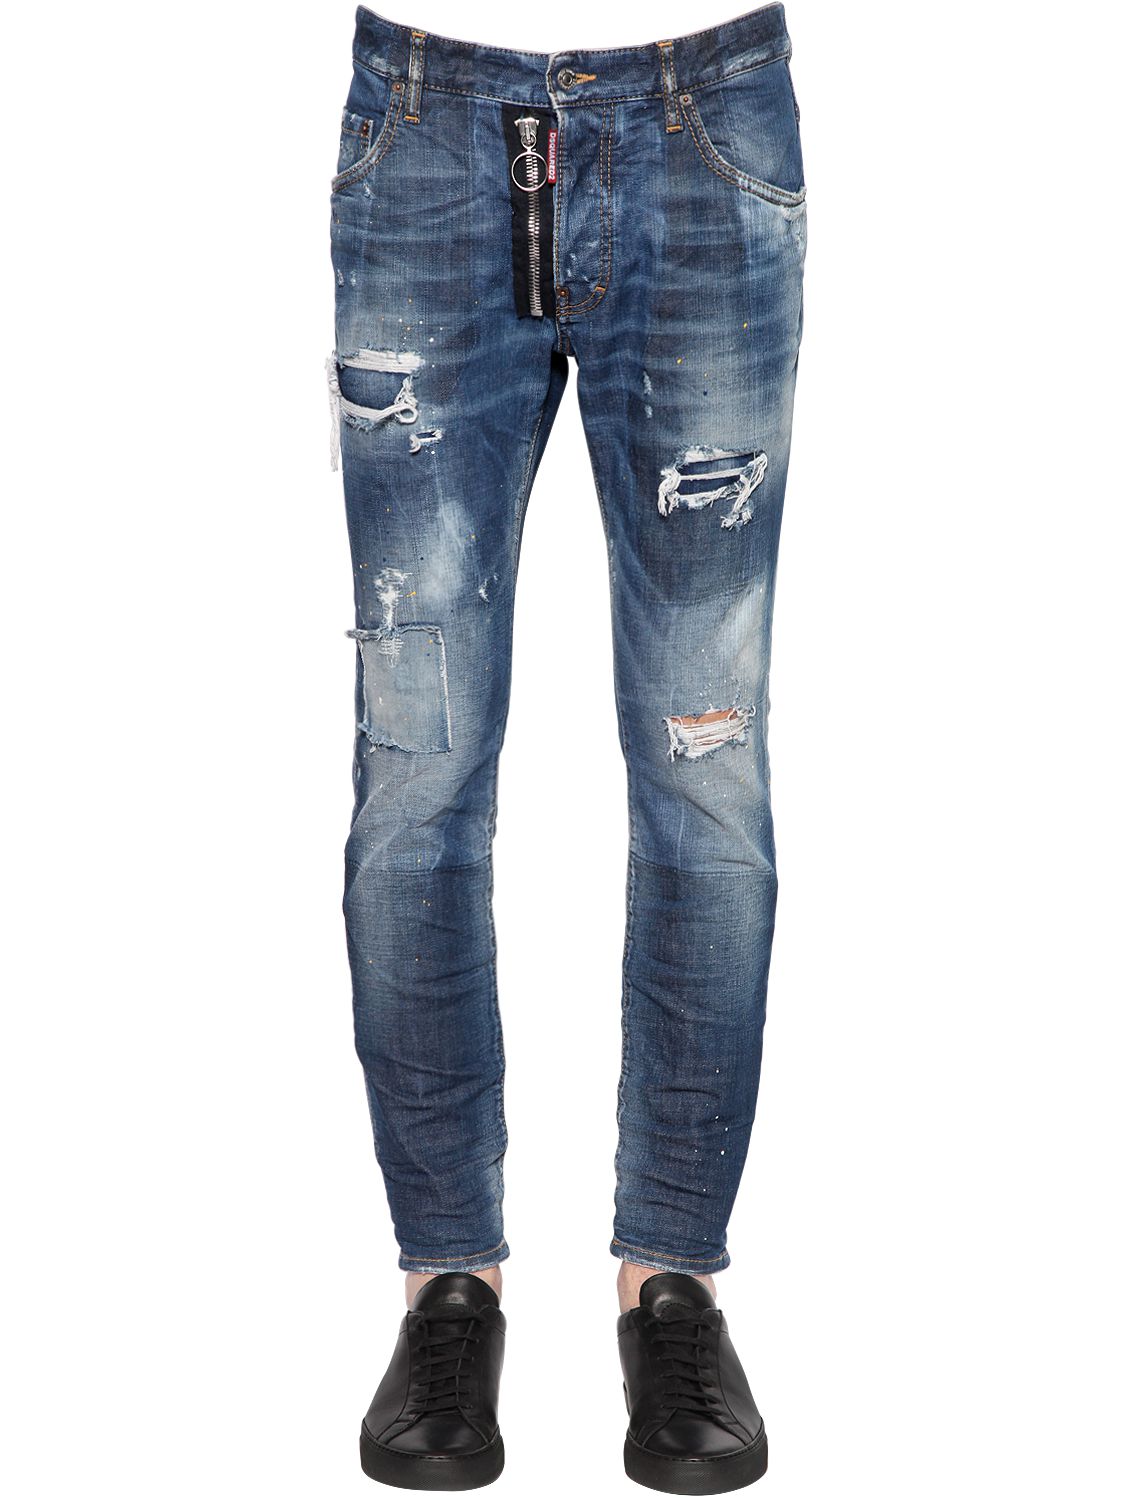 jeans dsquared pas cher chine